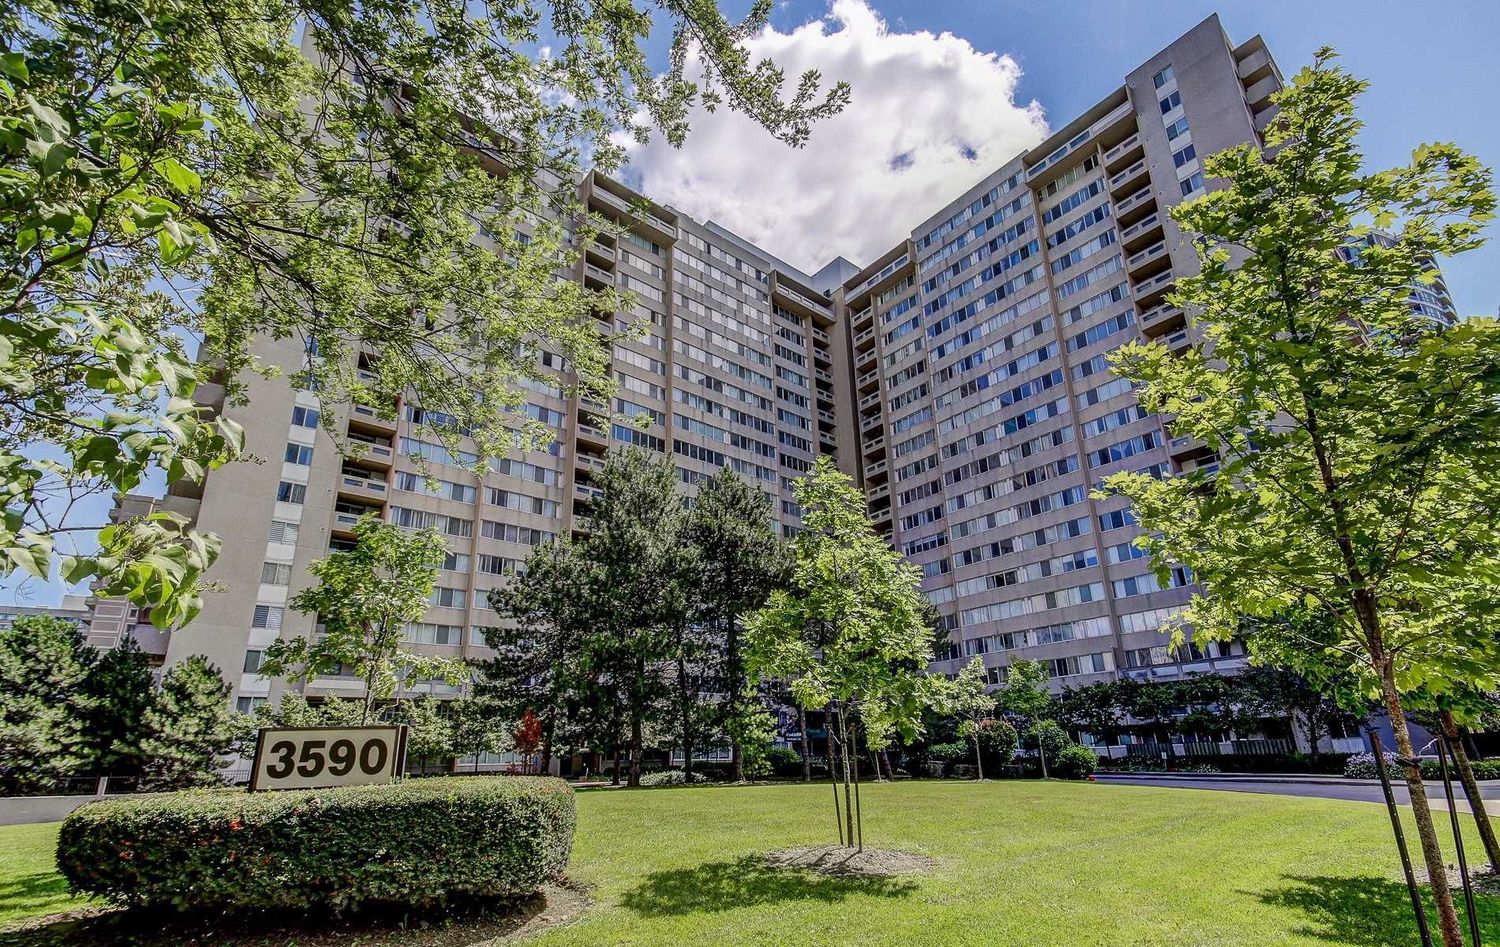 3590 Kaneff Crescent. 3590 Kaneff Crescent Condos is located in  Mississauga, Toronto - image #1 of 3